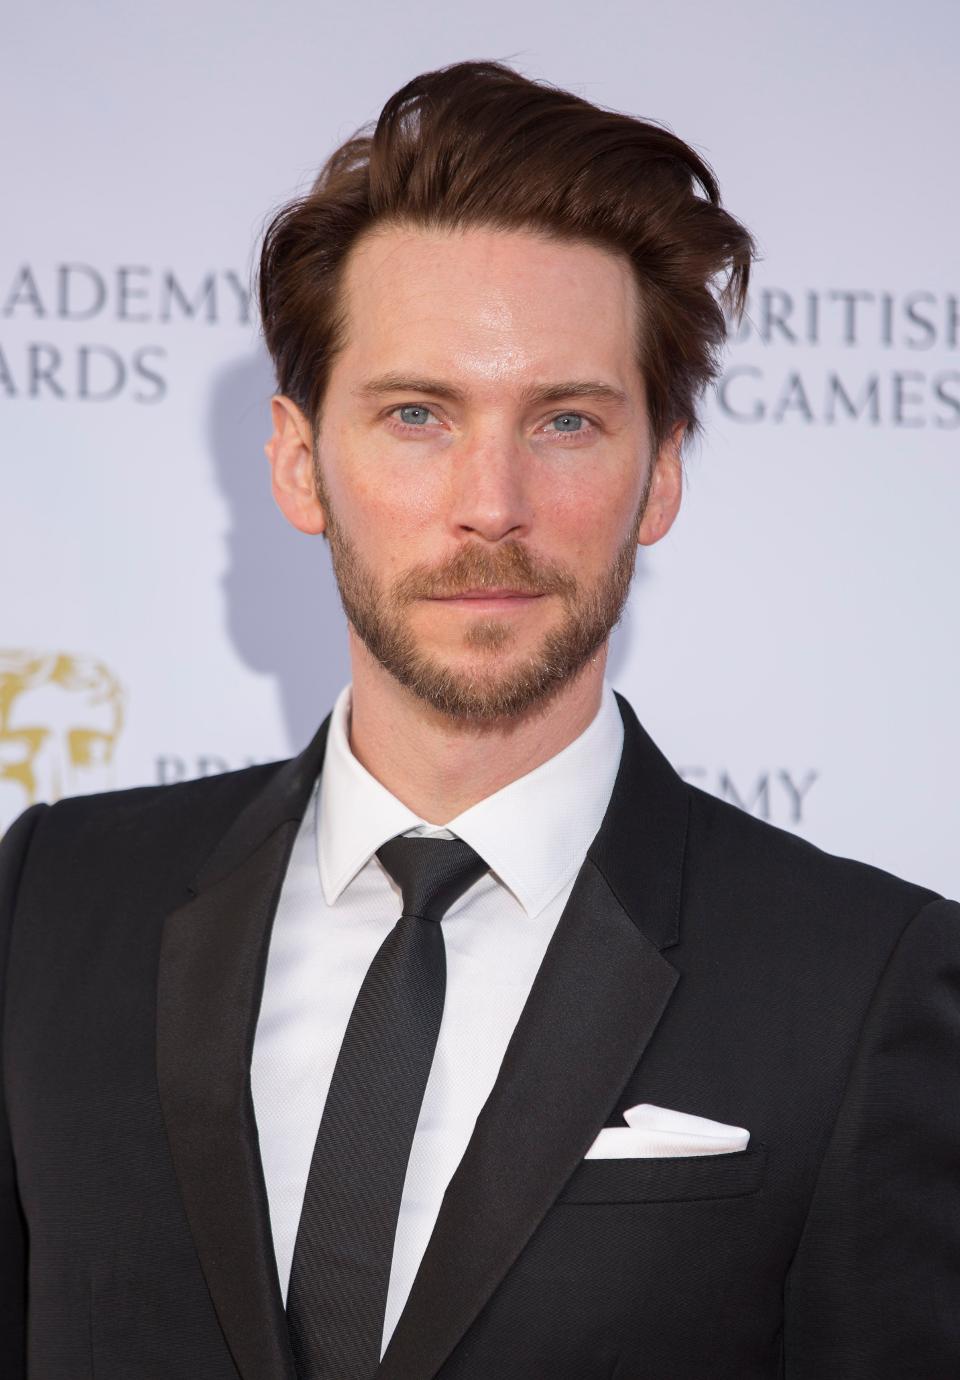 Troy Baker Voice Acting Roles｜TikTok Search